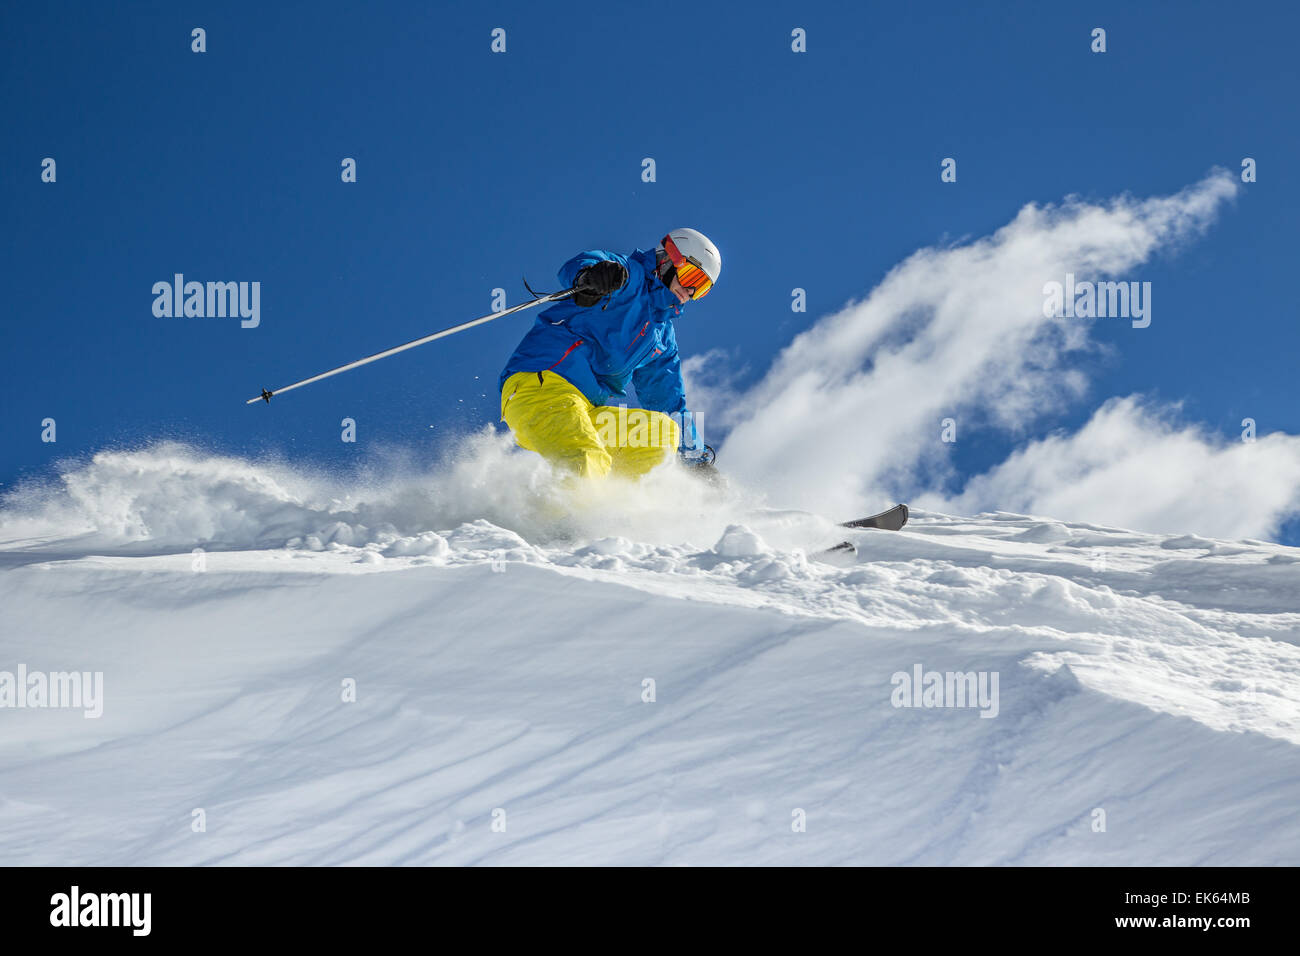 Skier skiing downhill in high mountains during sunny day. Stock Photo